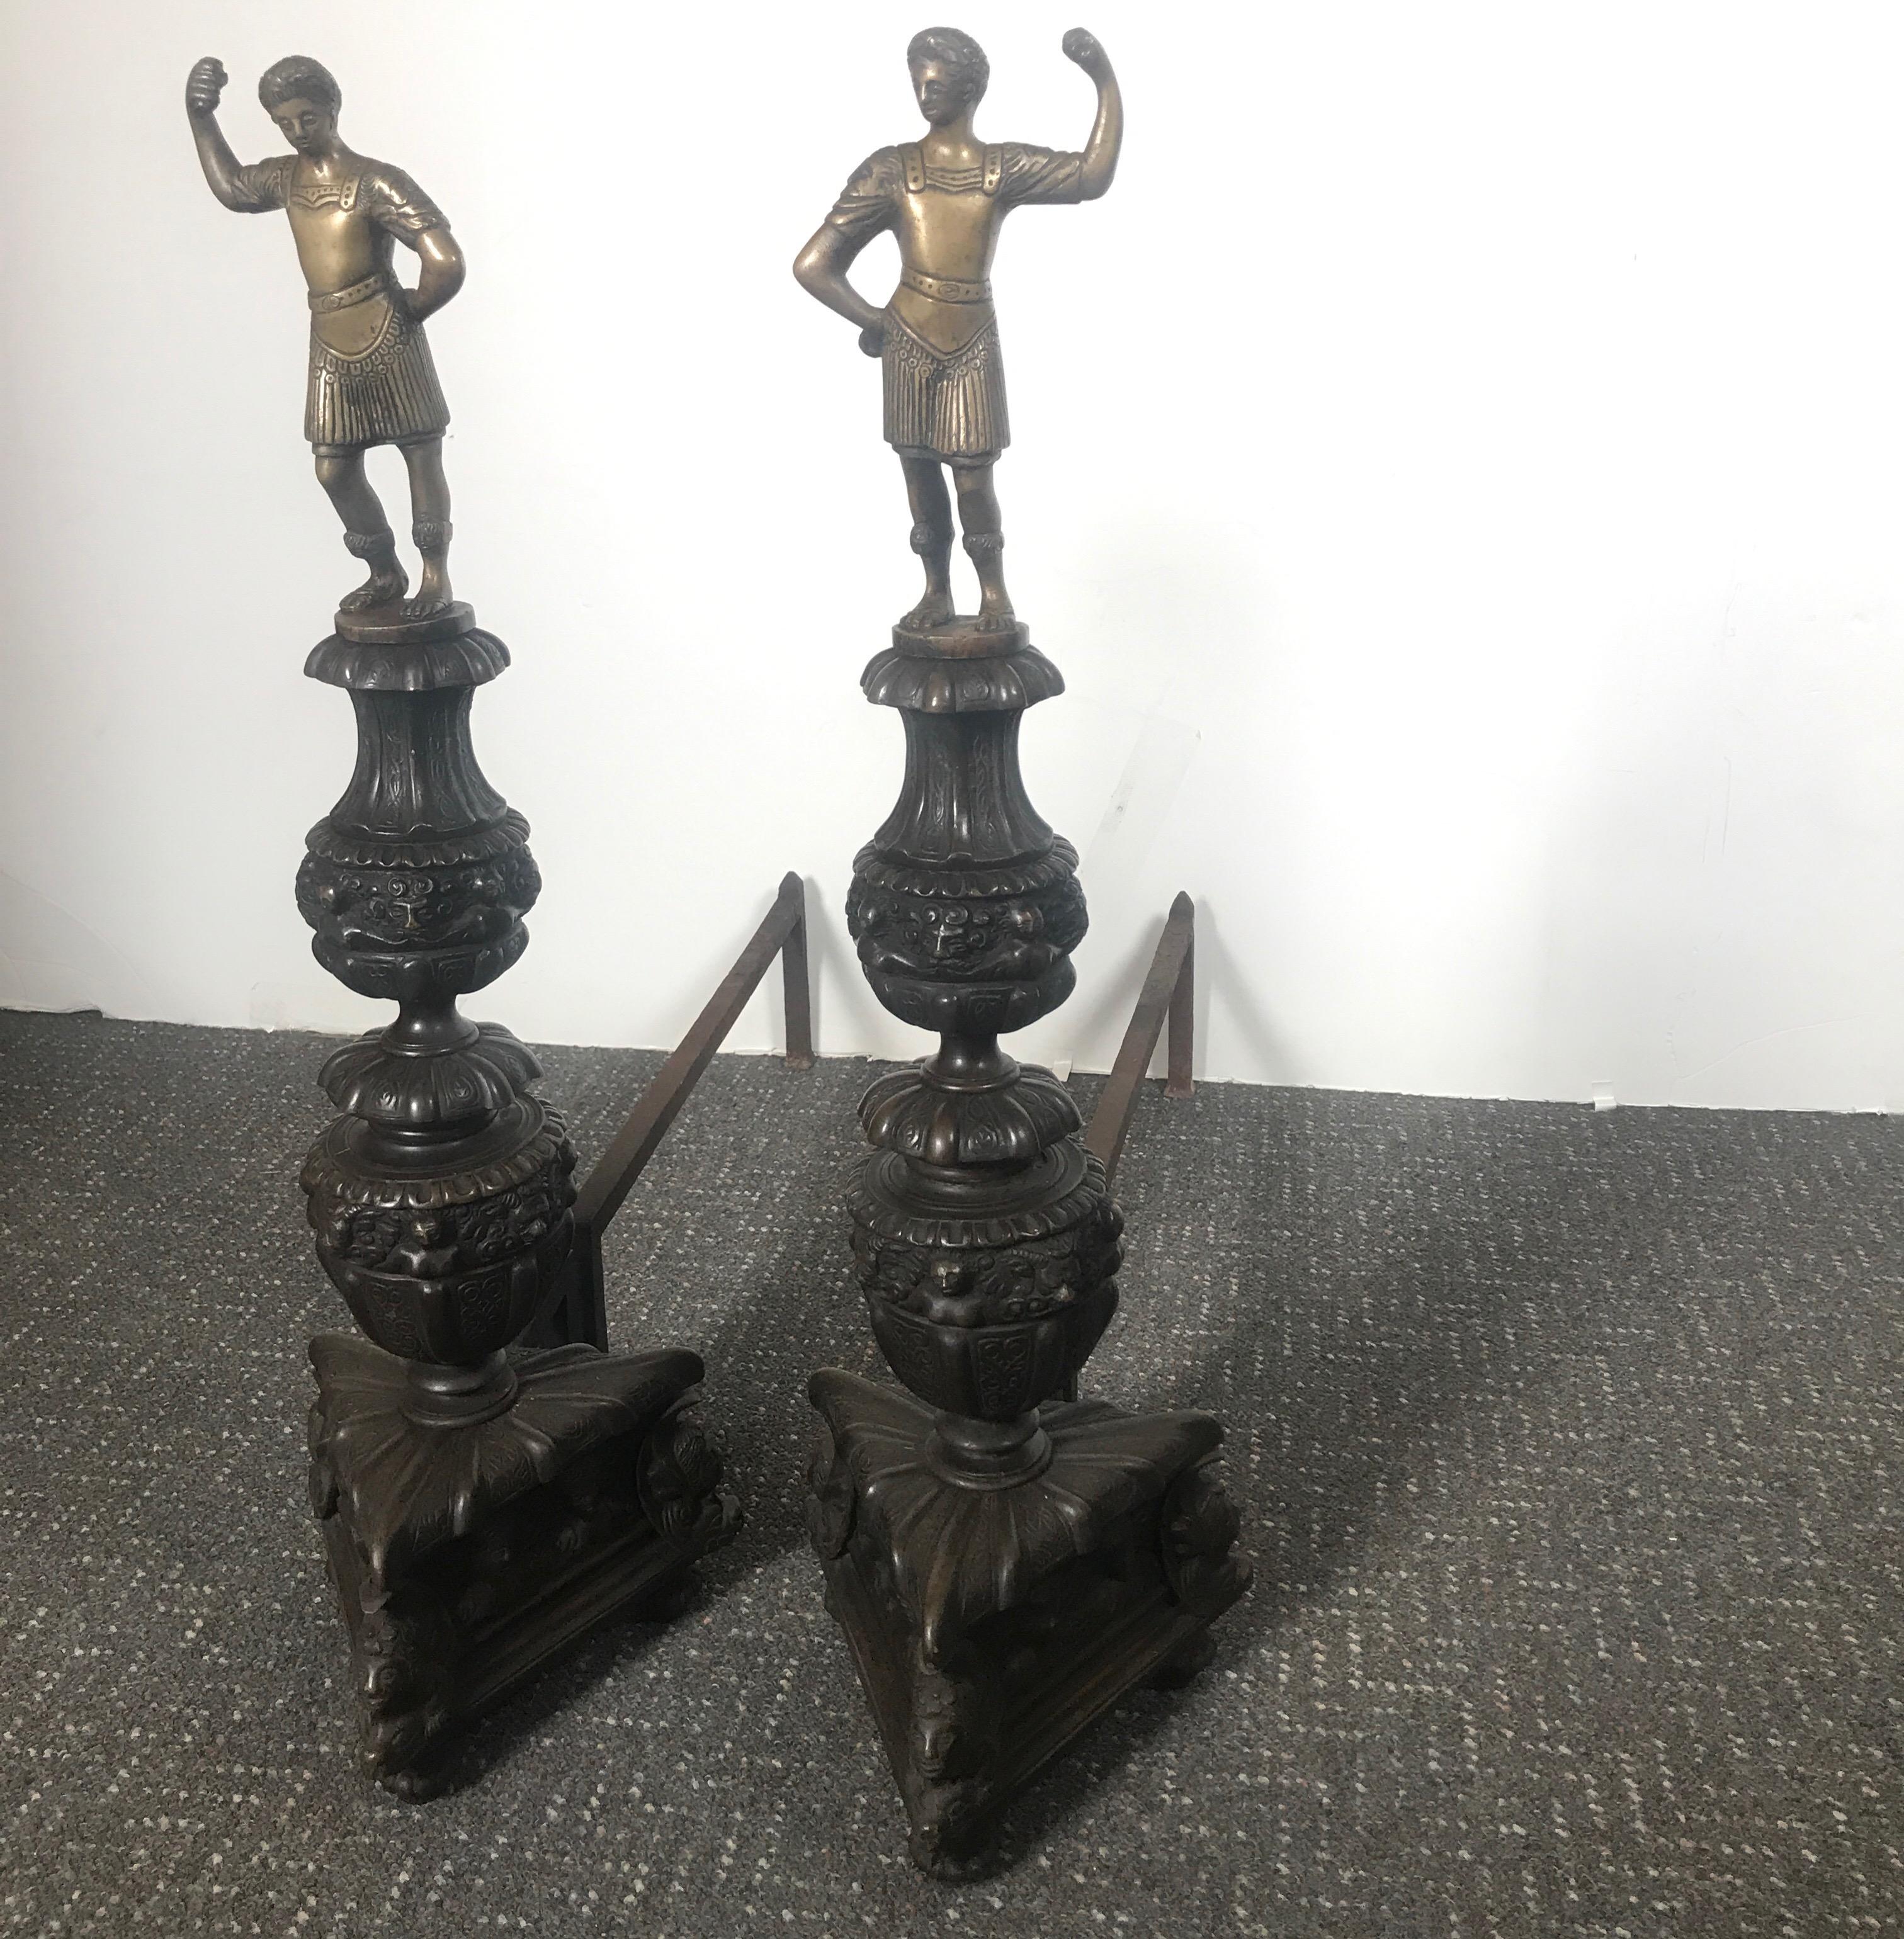 Antique bronze andirons with wrought iron backs. The tall figurative andirons with a Roman figure on the top above finely cast elaborate bases with triangular bases.